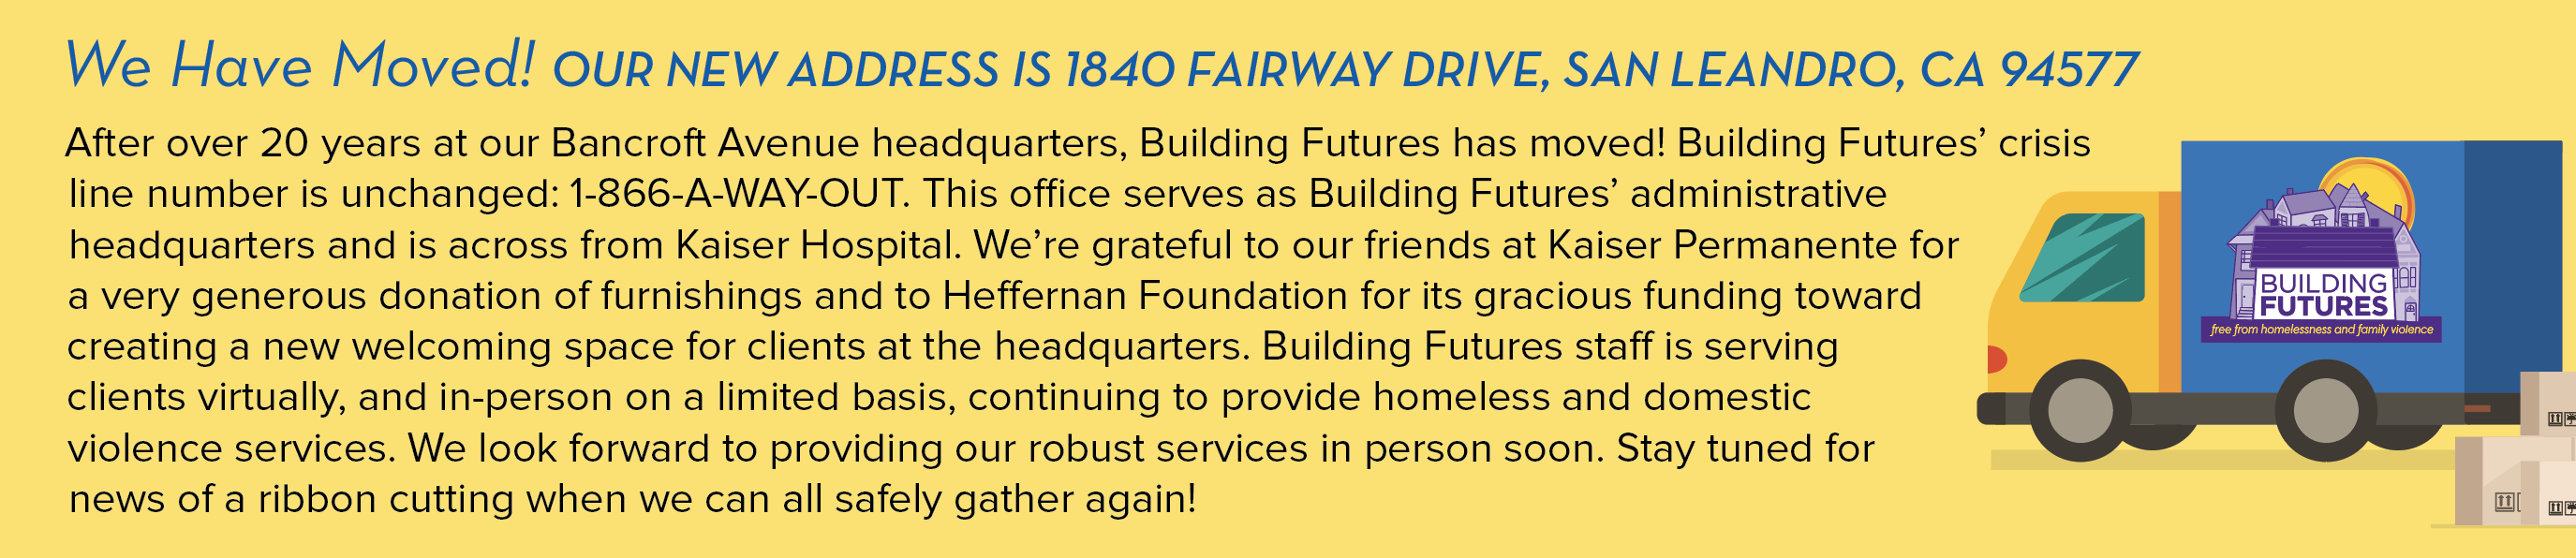 We Have Moved! Our new address is 1840 Fairway Drive, San Leandro, CA 94577